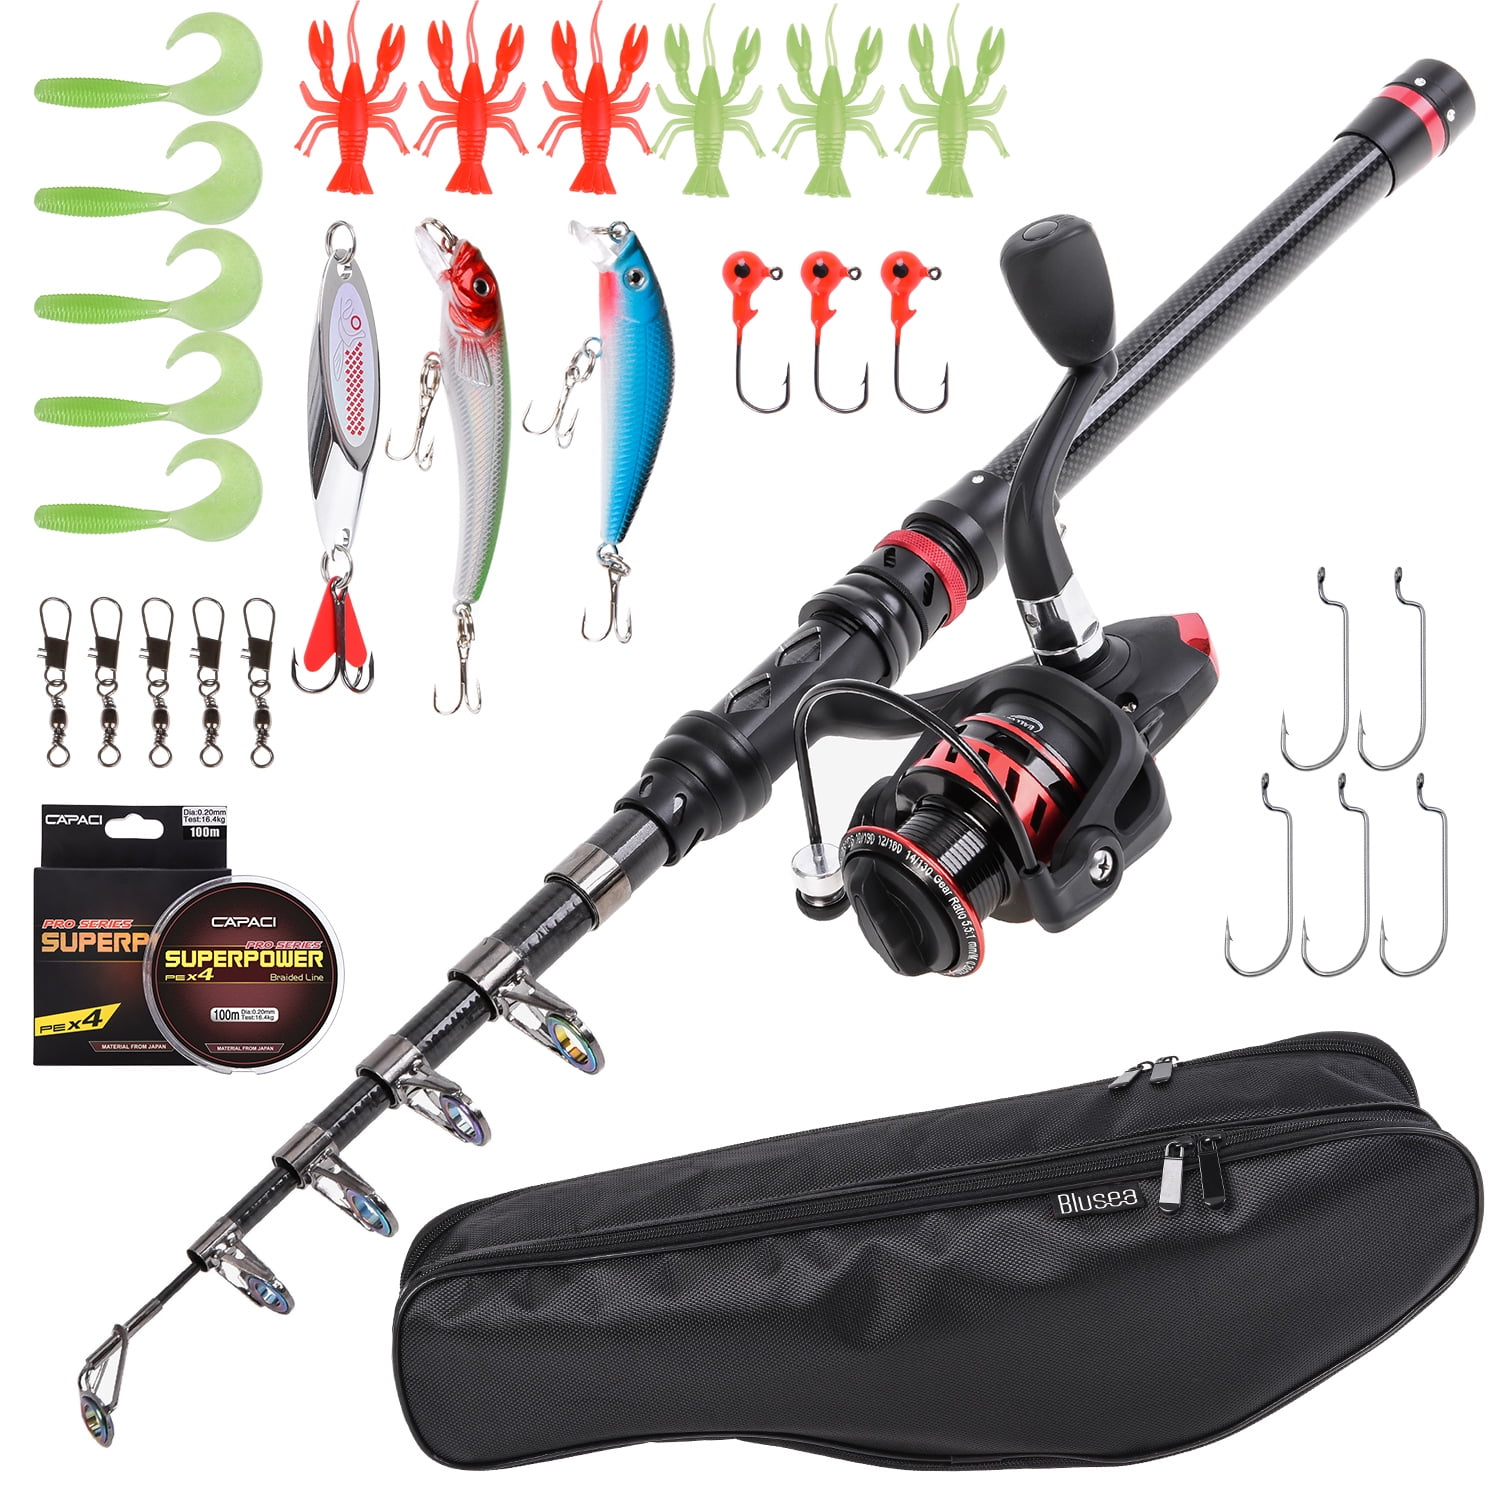 2.1m Fishing Rod Travel Sea Spinning Pole Carbon Telescope Smart Anglers Tool 